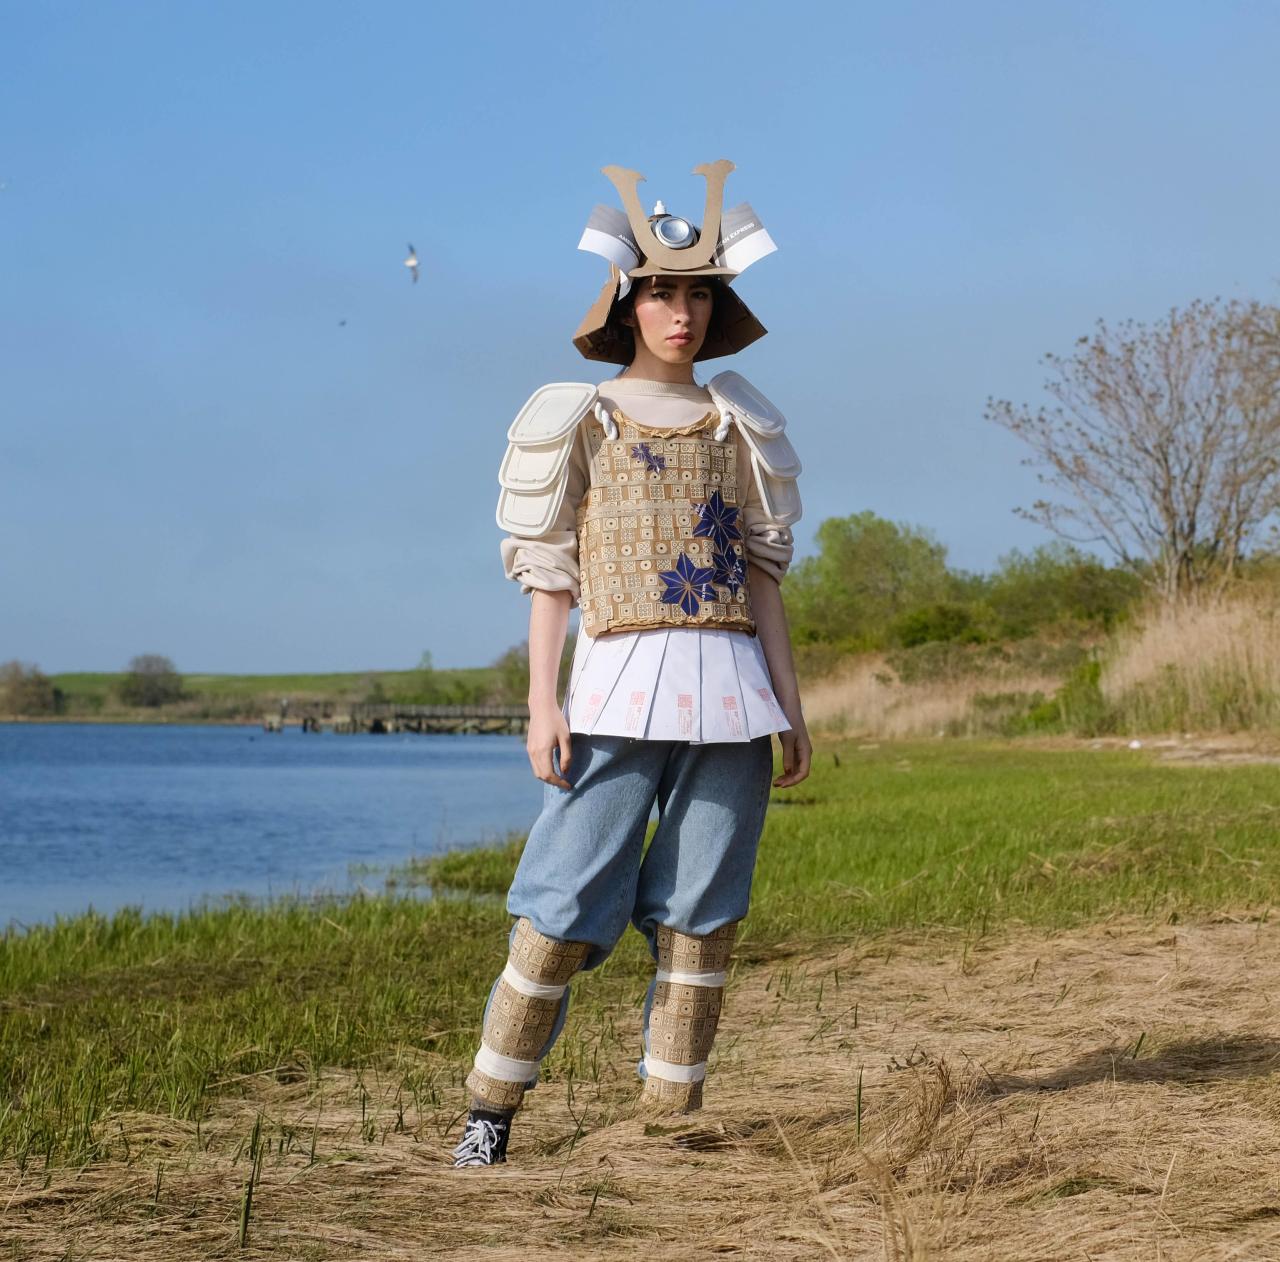 I made a samurai costume out of my recycling #pics#images#aww#gifs